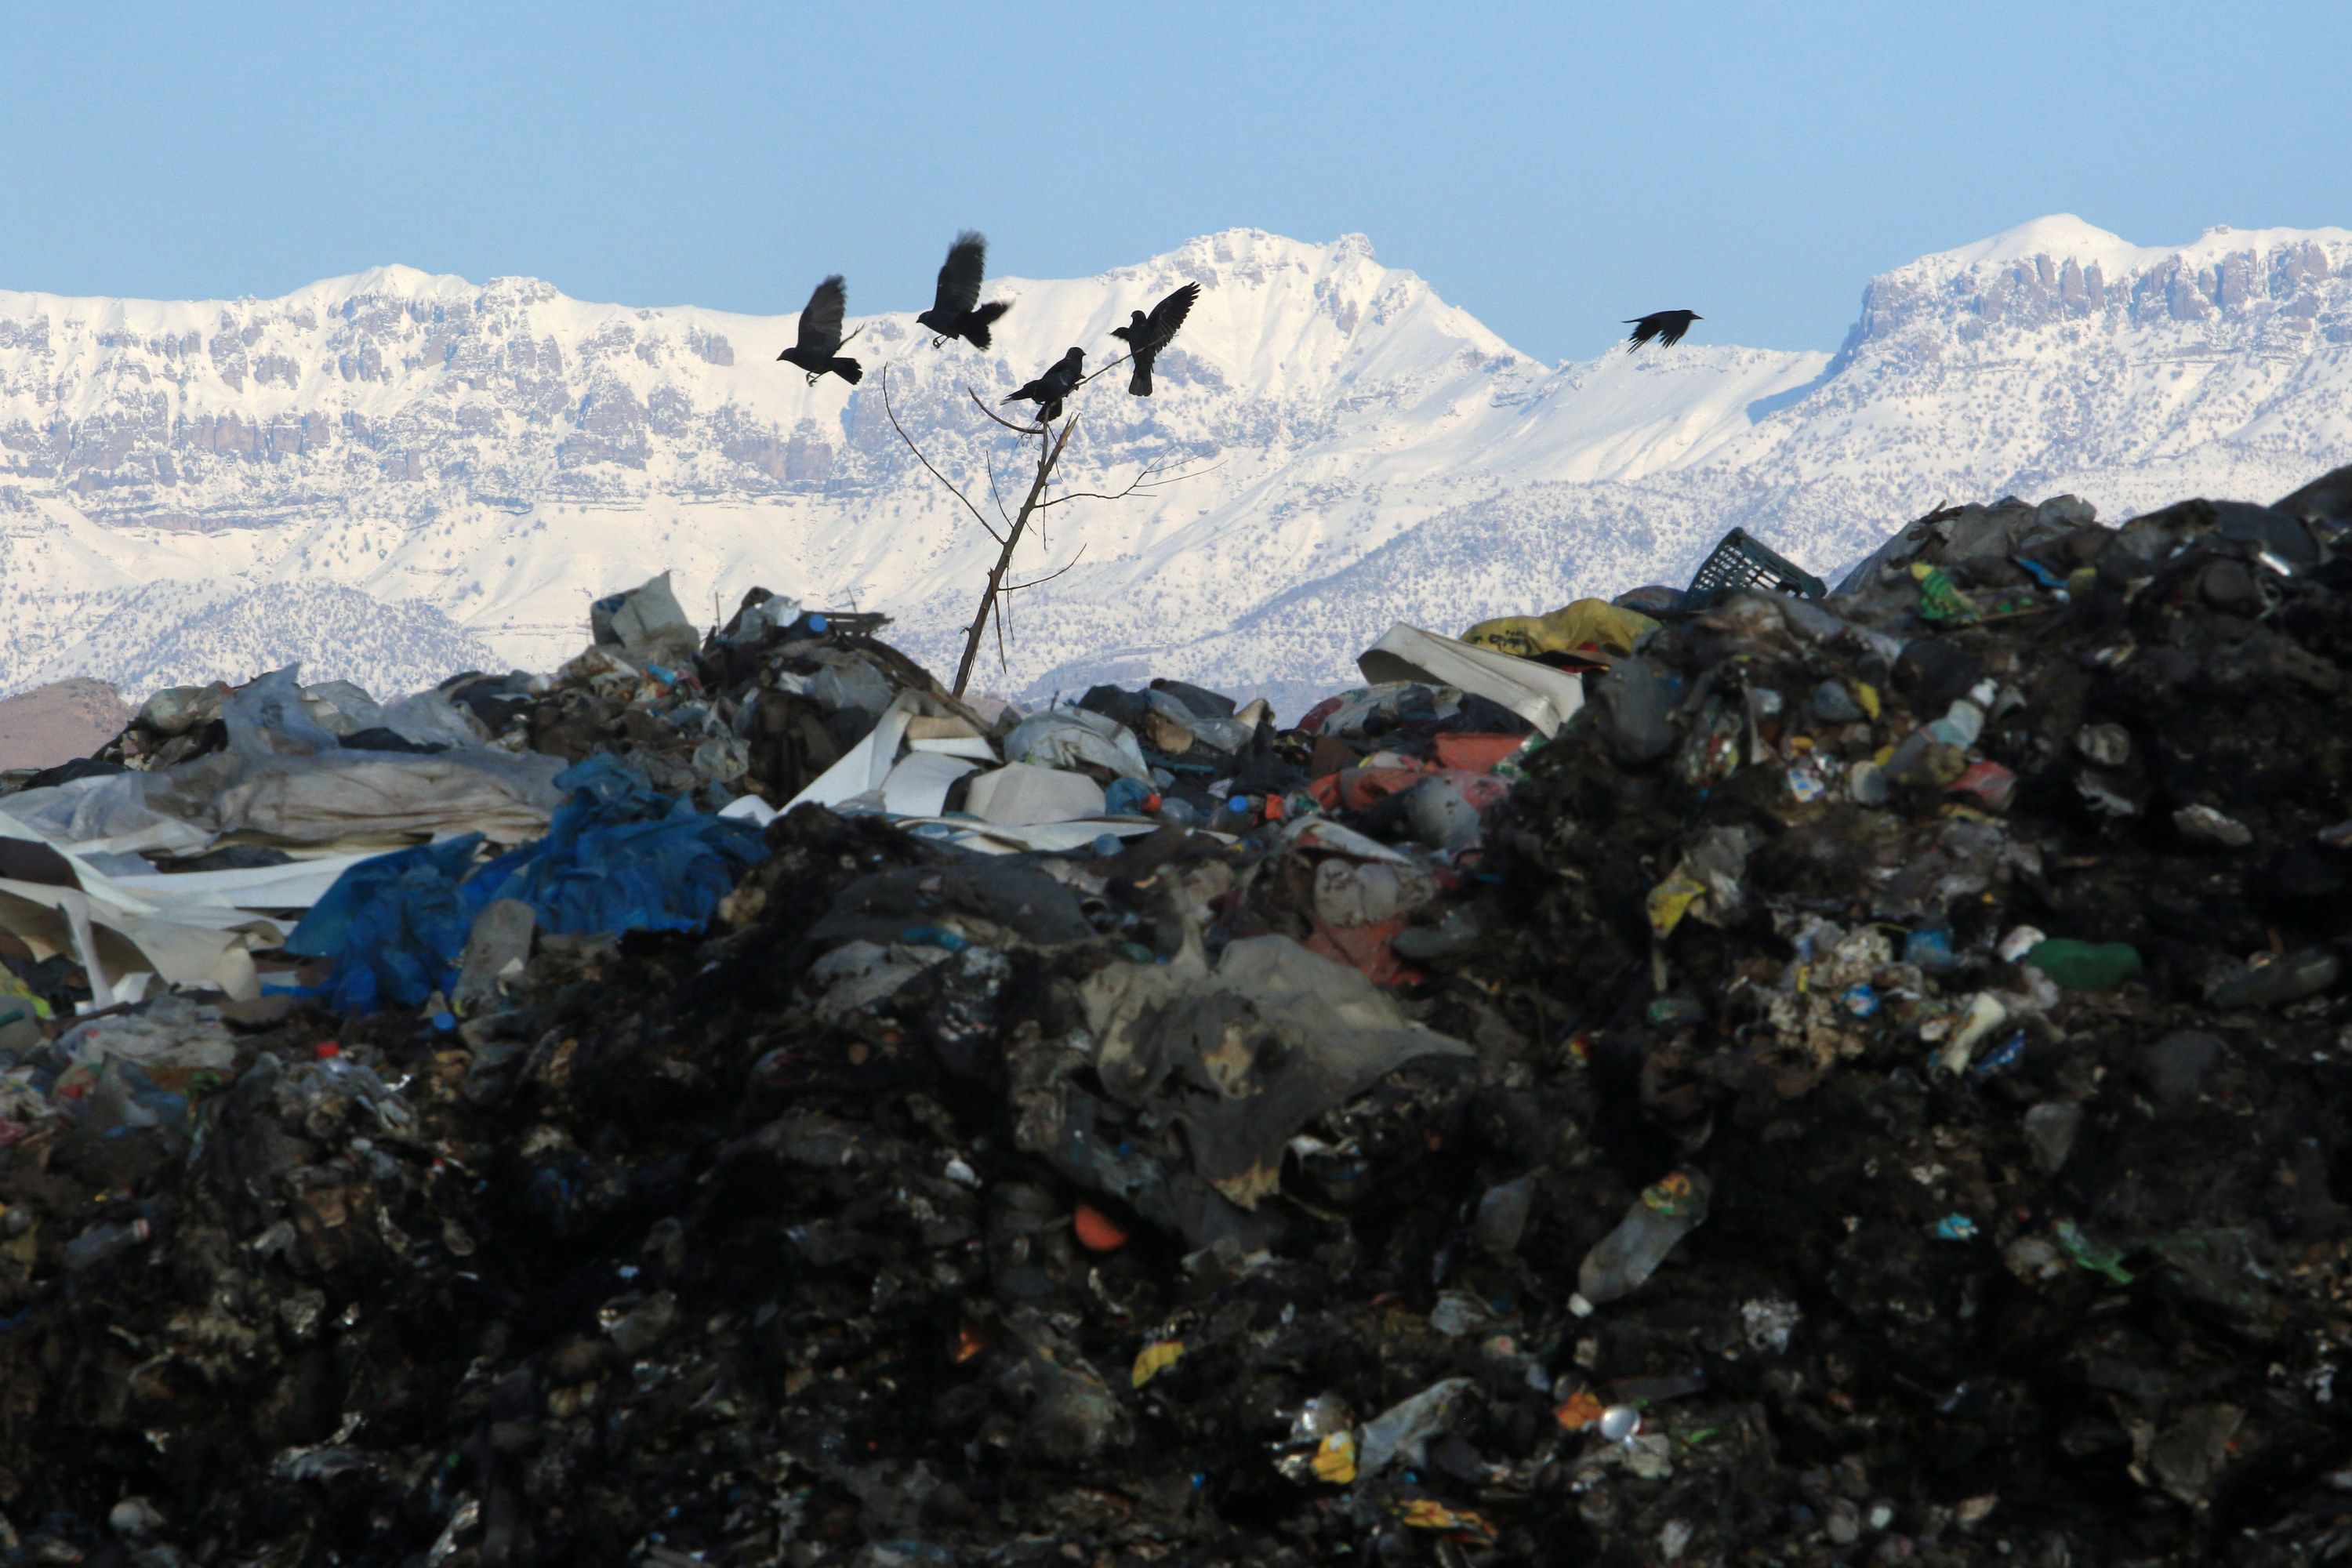 White mountains seen in the distance as birds fly over trash in the foreground